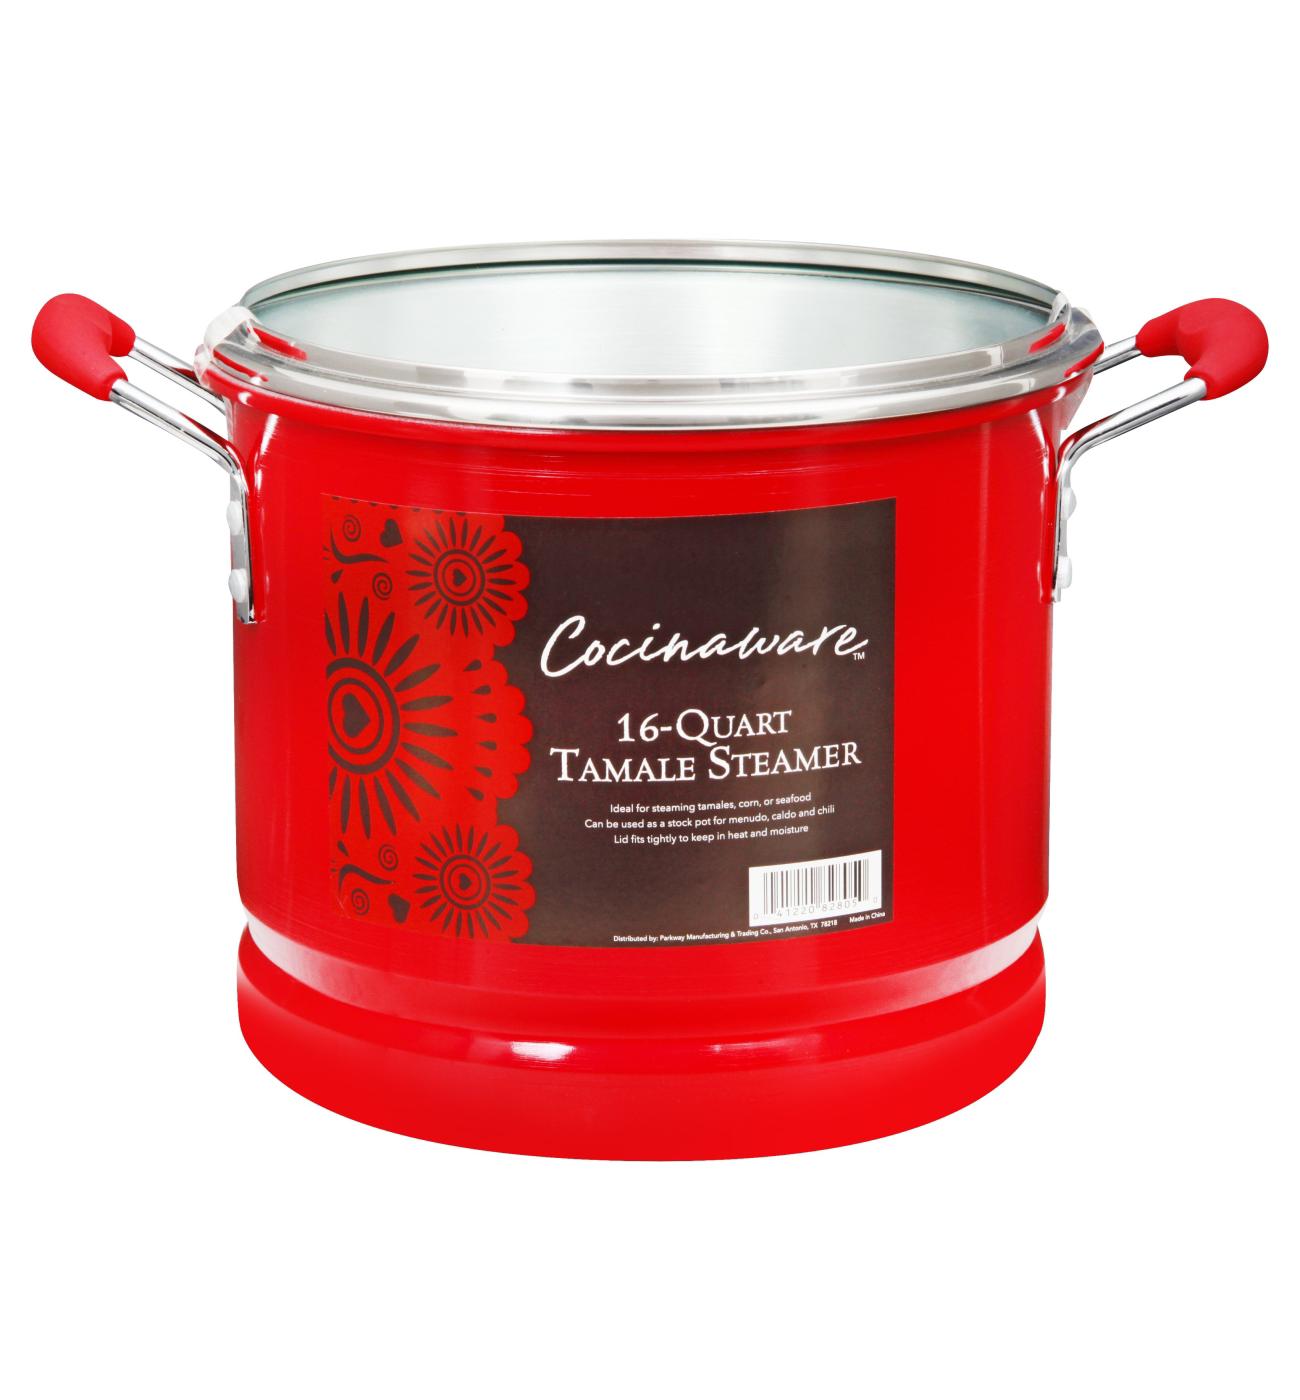 Cocinaware Red Tamale Steamer with Glass Lid; image 1 of 2